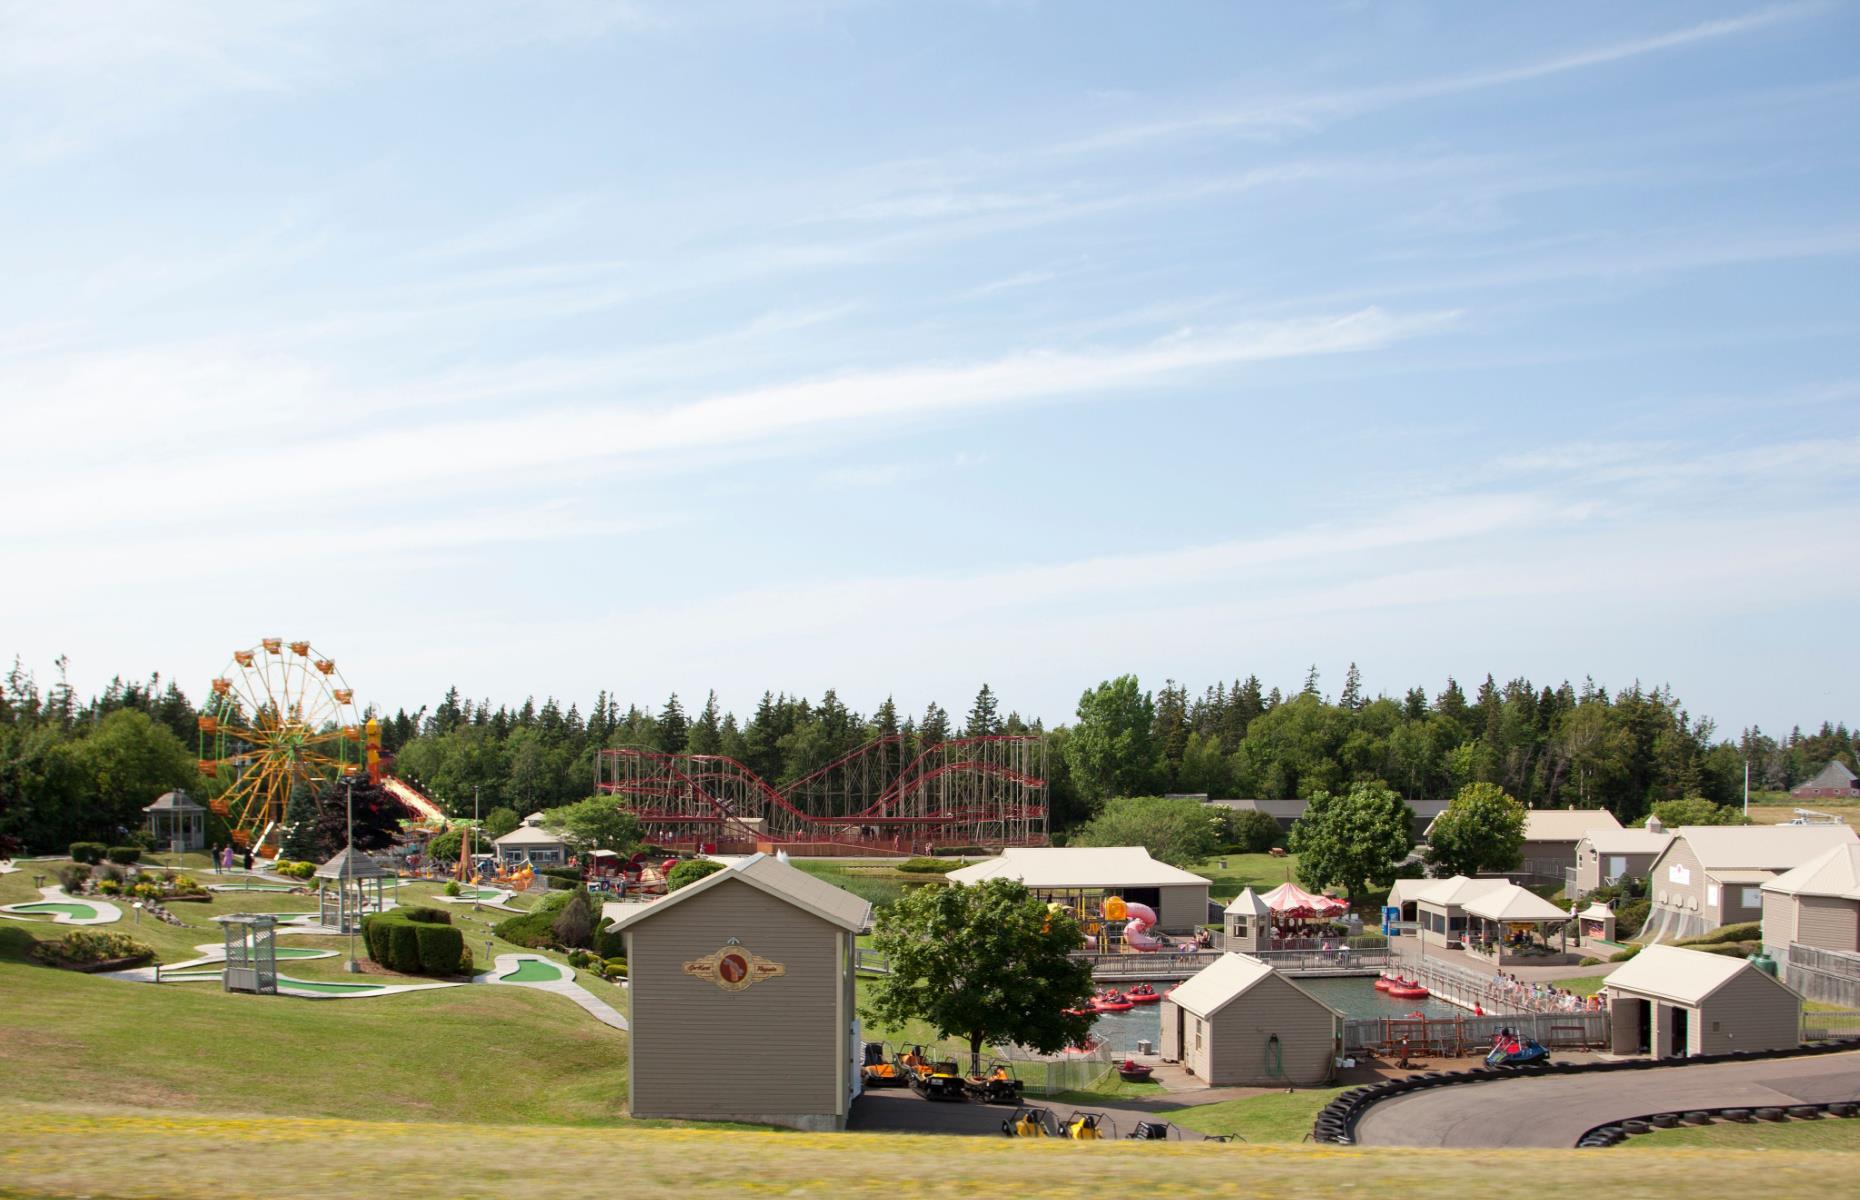 <p>Canada has some massive amusement parks, but for those seeking something slightly slower paced, <a href="https://www.maritimefun.com/sandspit/">Sandspit</a> in <a href="https://www.loveexploring.com/guides/79391/prince-edward-island-top-things-to-do-where-to-stay-what-to-eat">PEI</a> fits the bill. The classic midway features 15 amusement rides including the whopping Cyclone roller coaster, bumper boats and a picture-perfect Ferris wheel. Old-fashioned carnival games are also on offer, as well as mini-golf and other wholesome family fun, all presented in a pretty island setting.</p>  <p><strong><a href="https://www.loveexploring.com/galleries/136590/recordbreaking-roller-coasters-for-thrillseekers?page=1">Now check out these record-breaking roller coasters from around the world</a></strong></p>